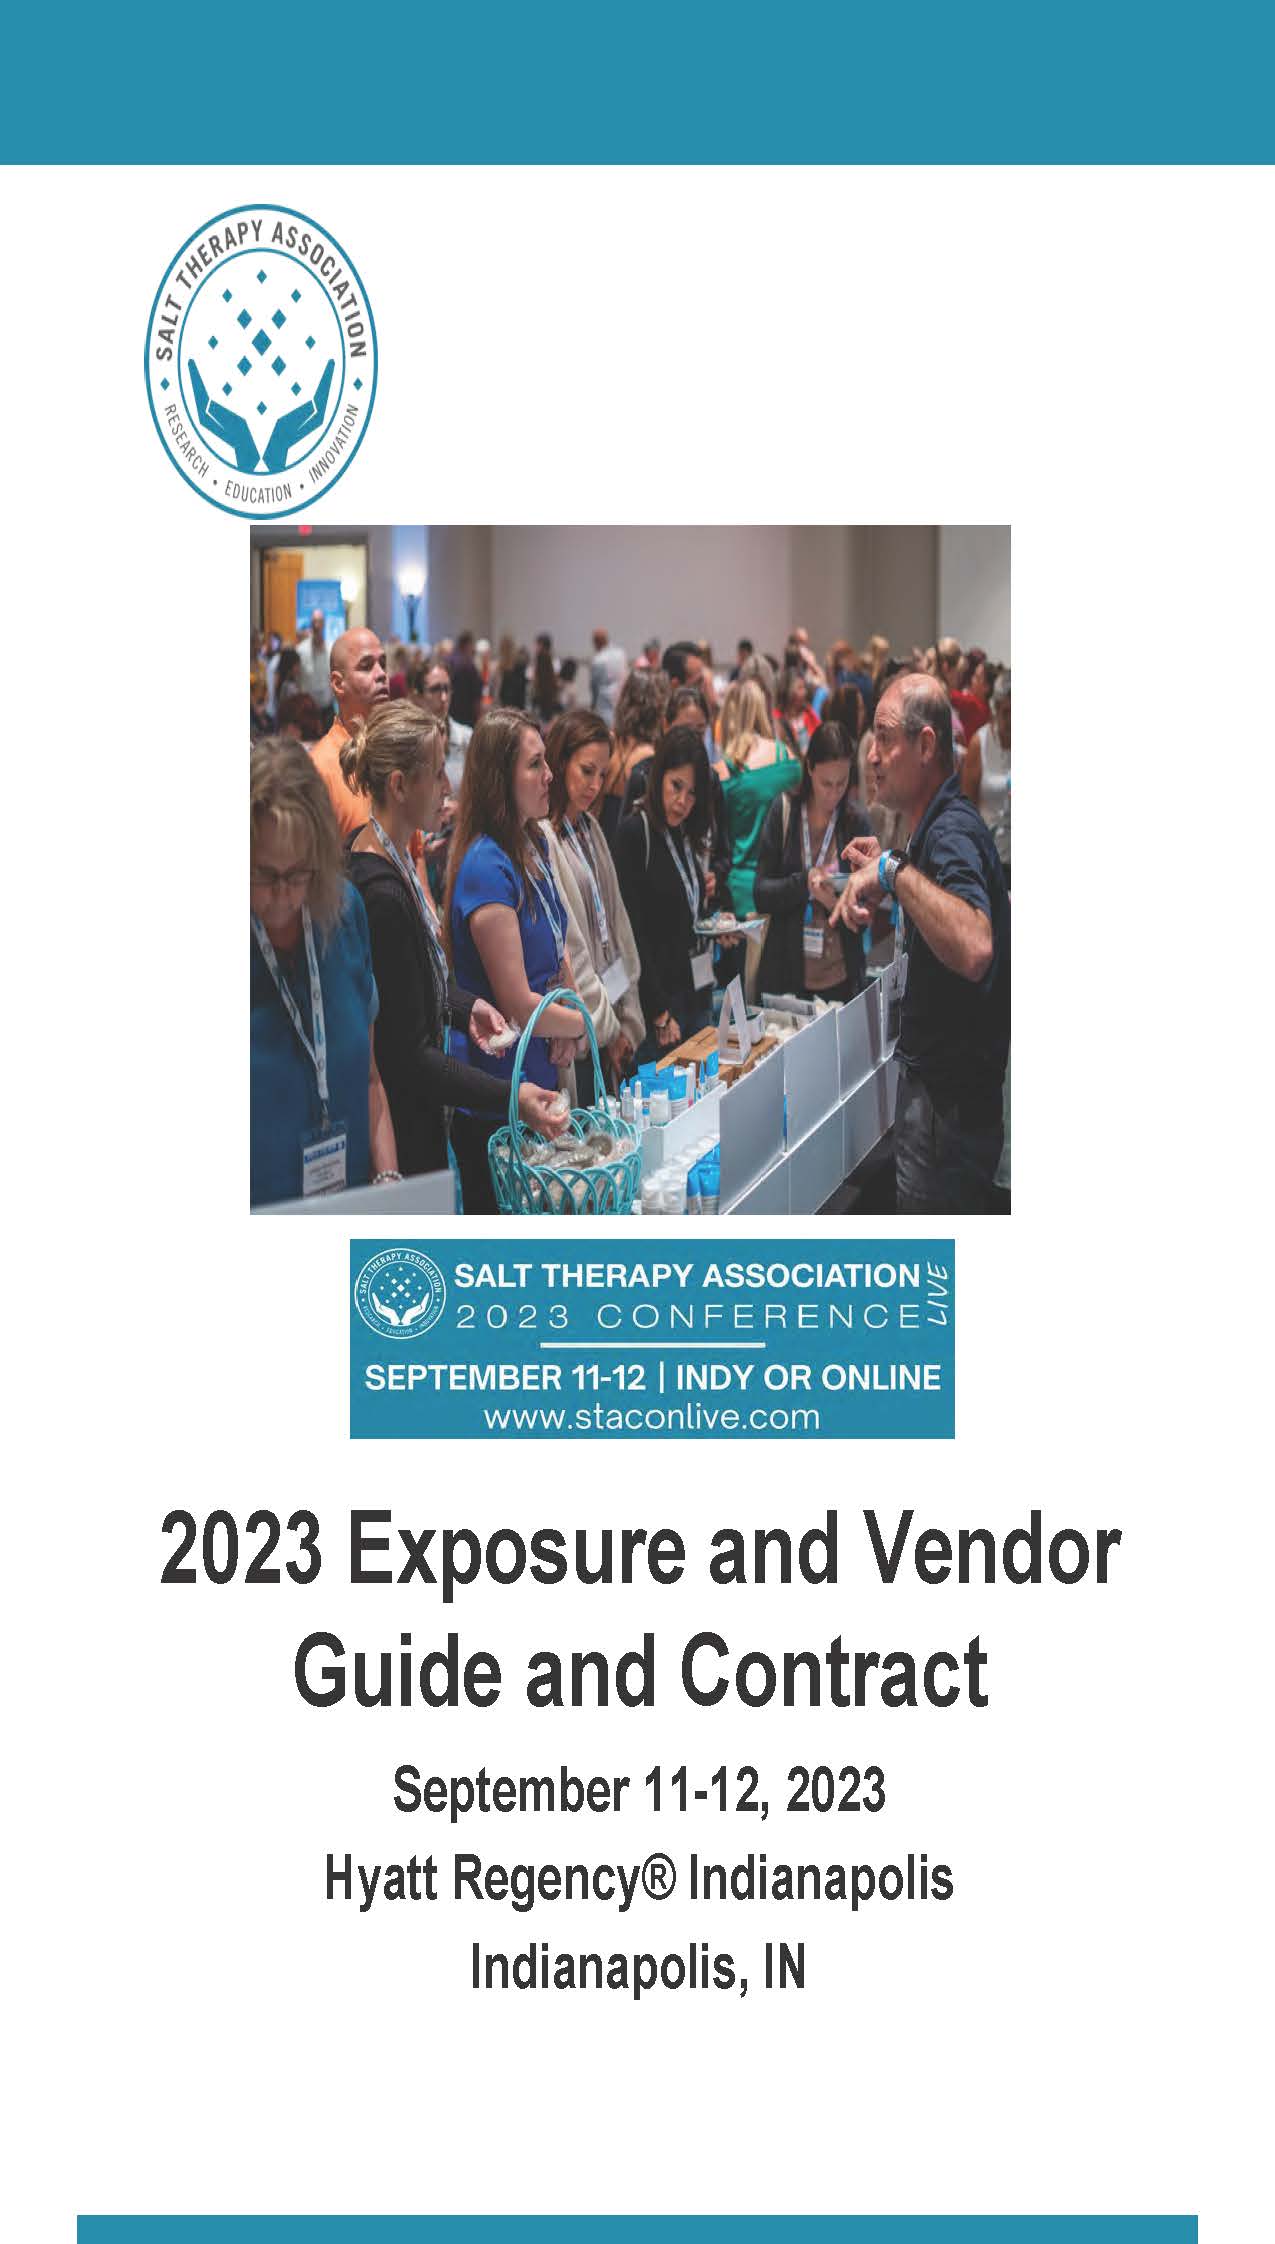 Vendor Booth Package